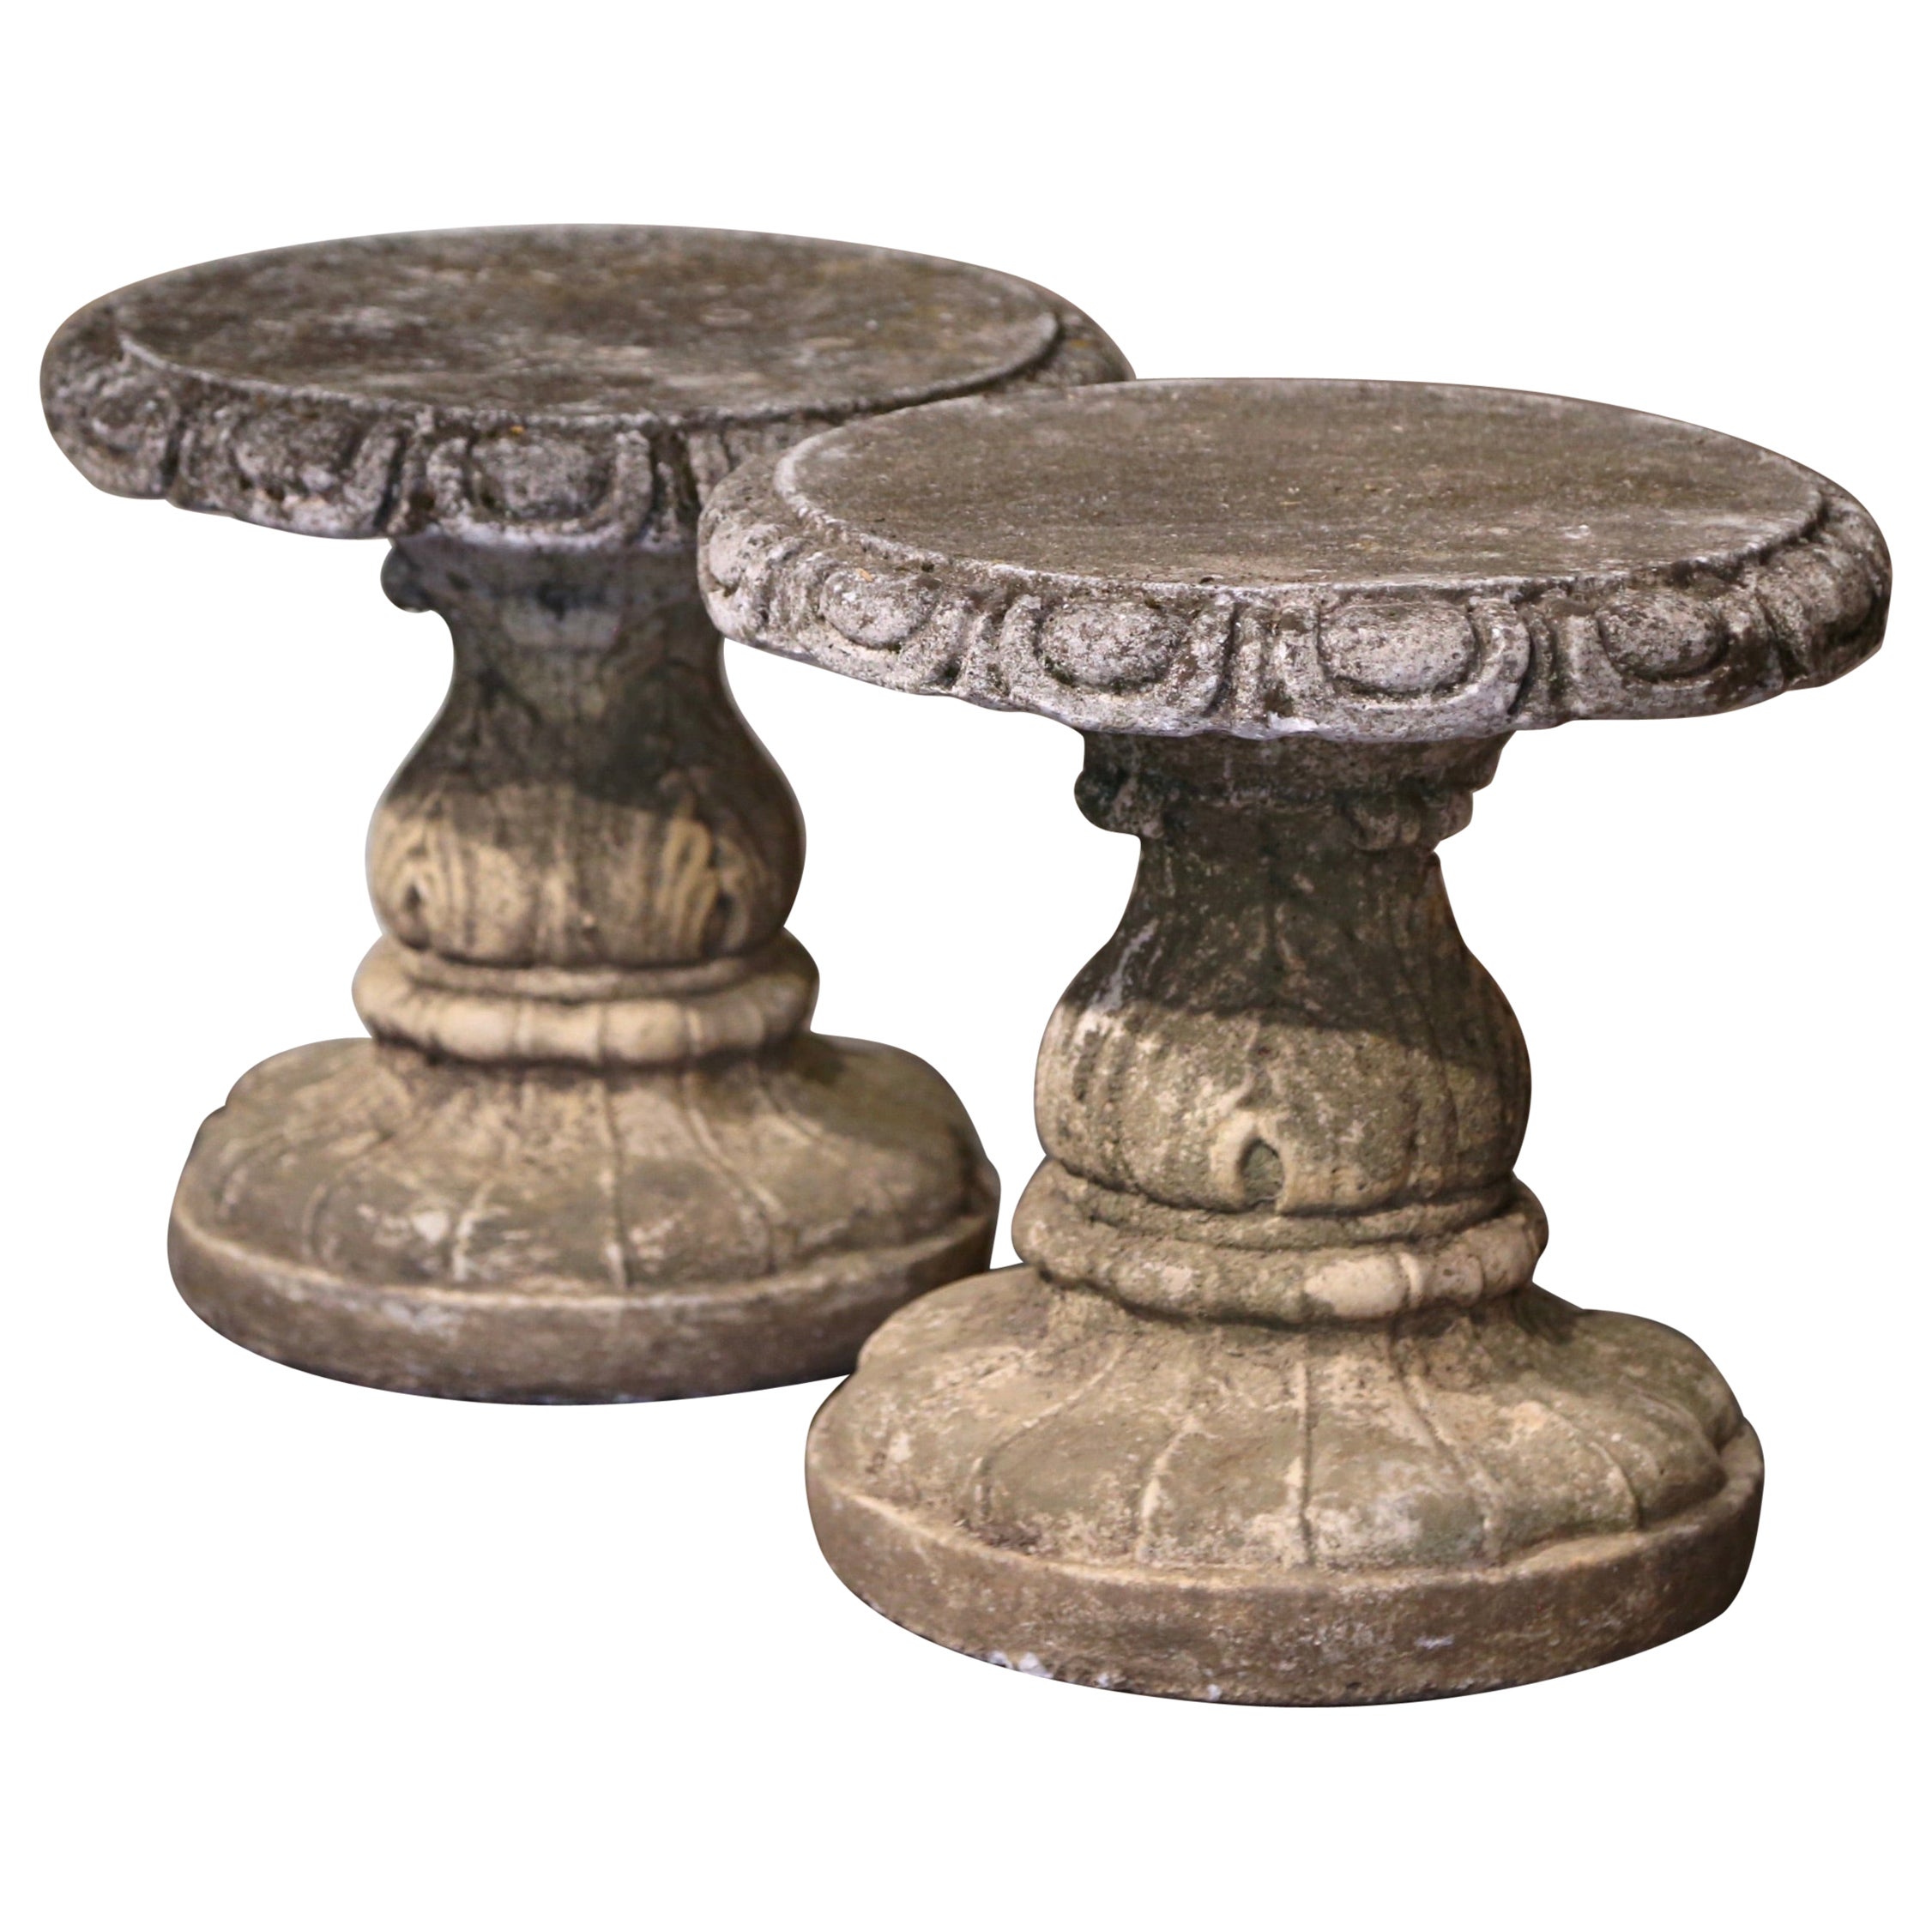 Pair of Early 20th Century French Weathered Concrete Stools from Normandy